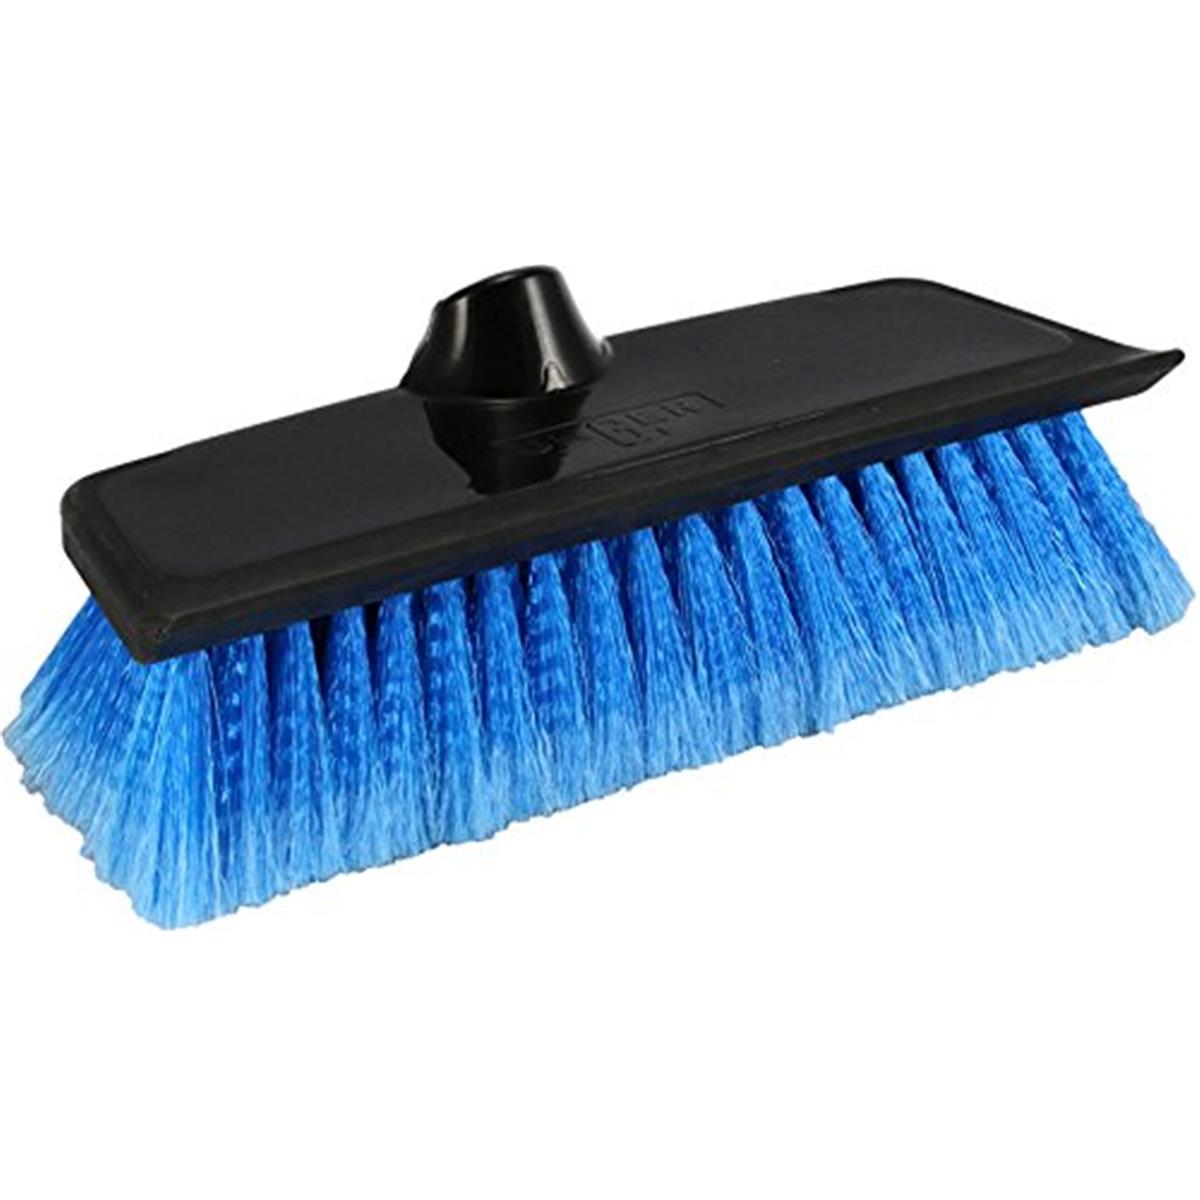 Picture of Arett Sales U42 964810 10 in. Scrub Brush with Squeegee